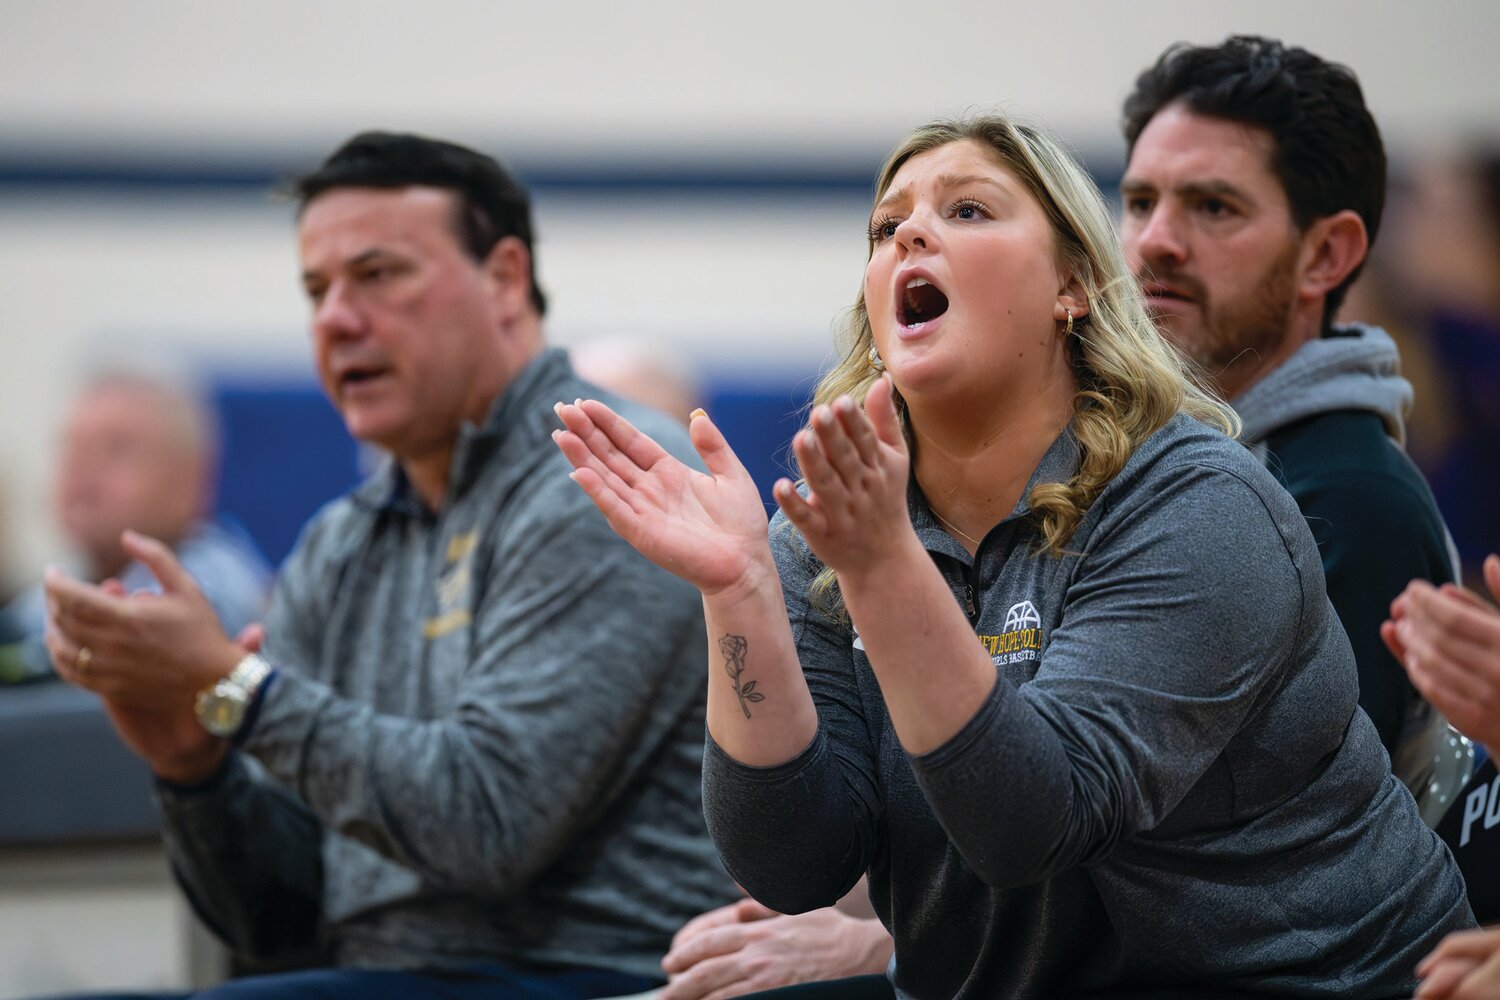 New Hope-Solebury coaches during the first quarter, from left, head coach Steve Polinsky, and assistant coaches Kalie Soulsby and John Turner.